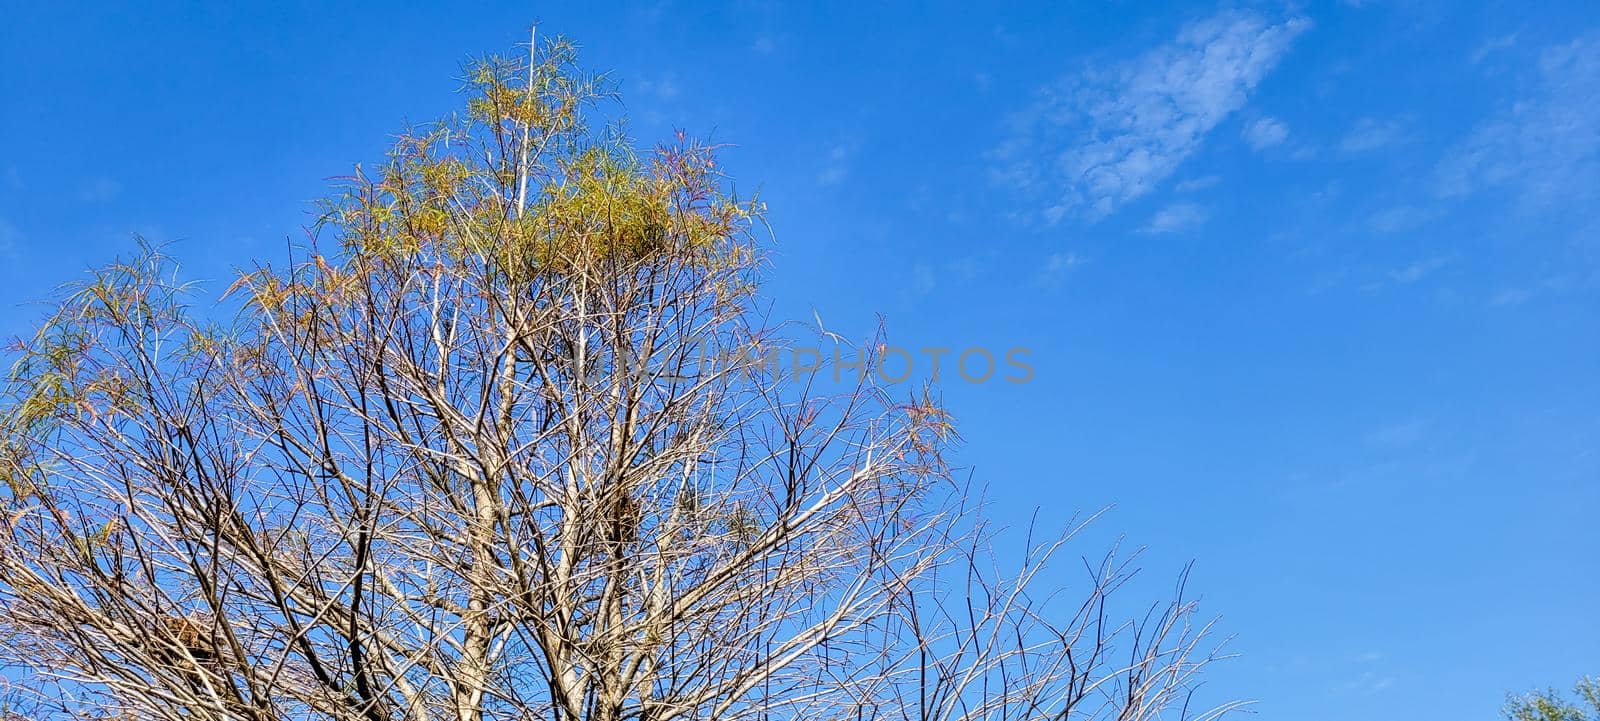 blue sky in park with dry trees in winter by sarsa